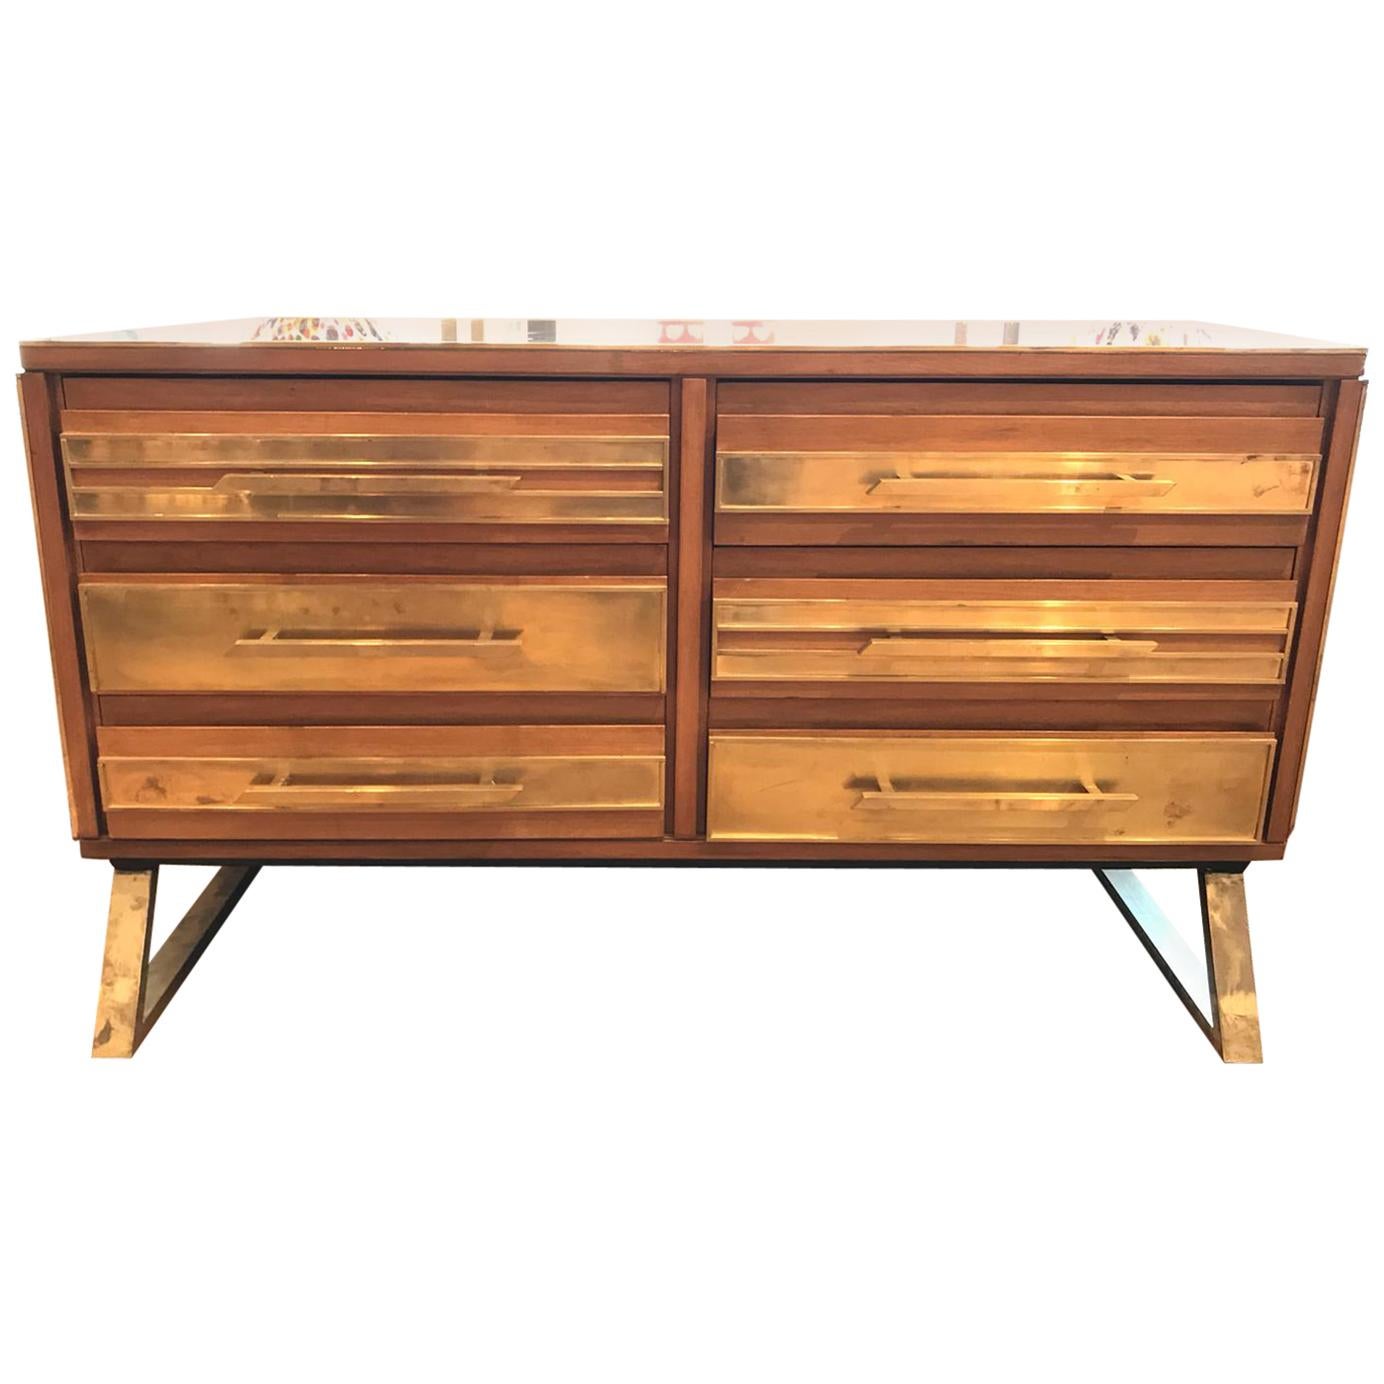 Small Sideboard, Made in Italy by Craftsman, Handmade, 1990s